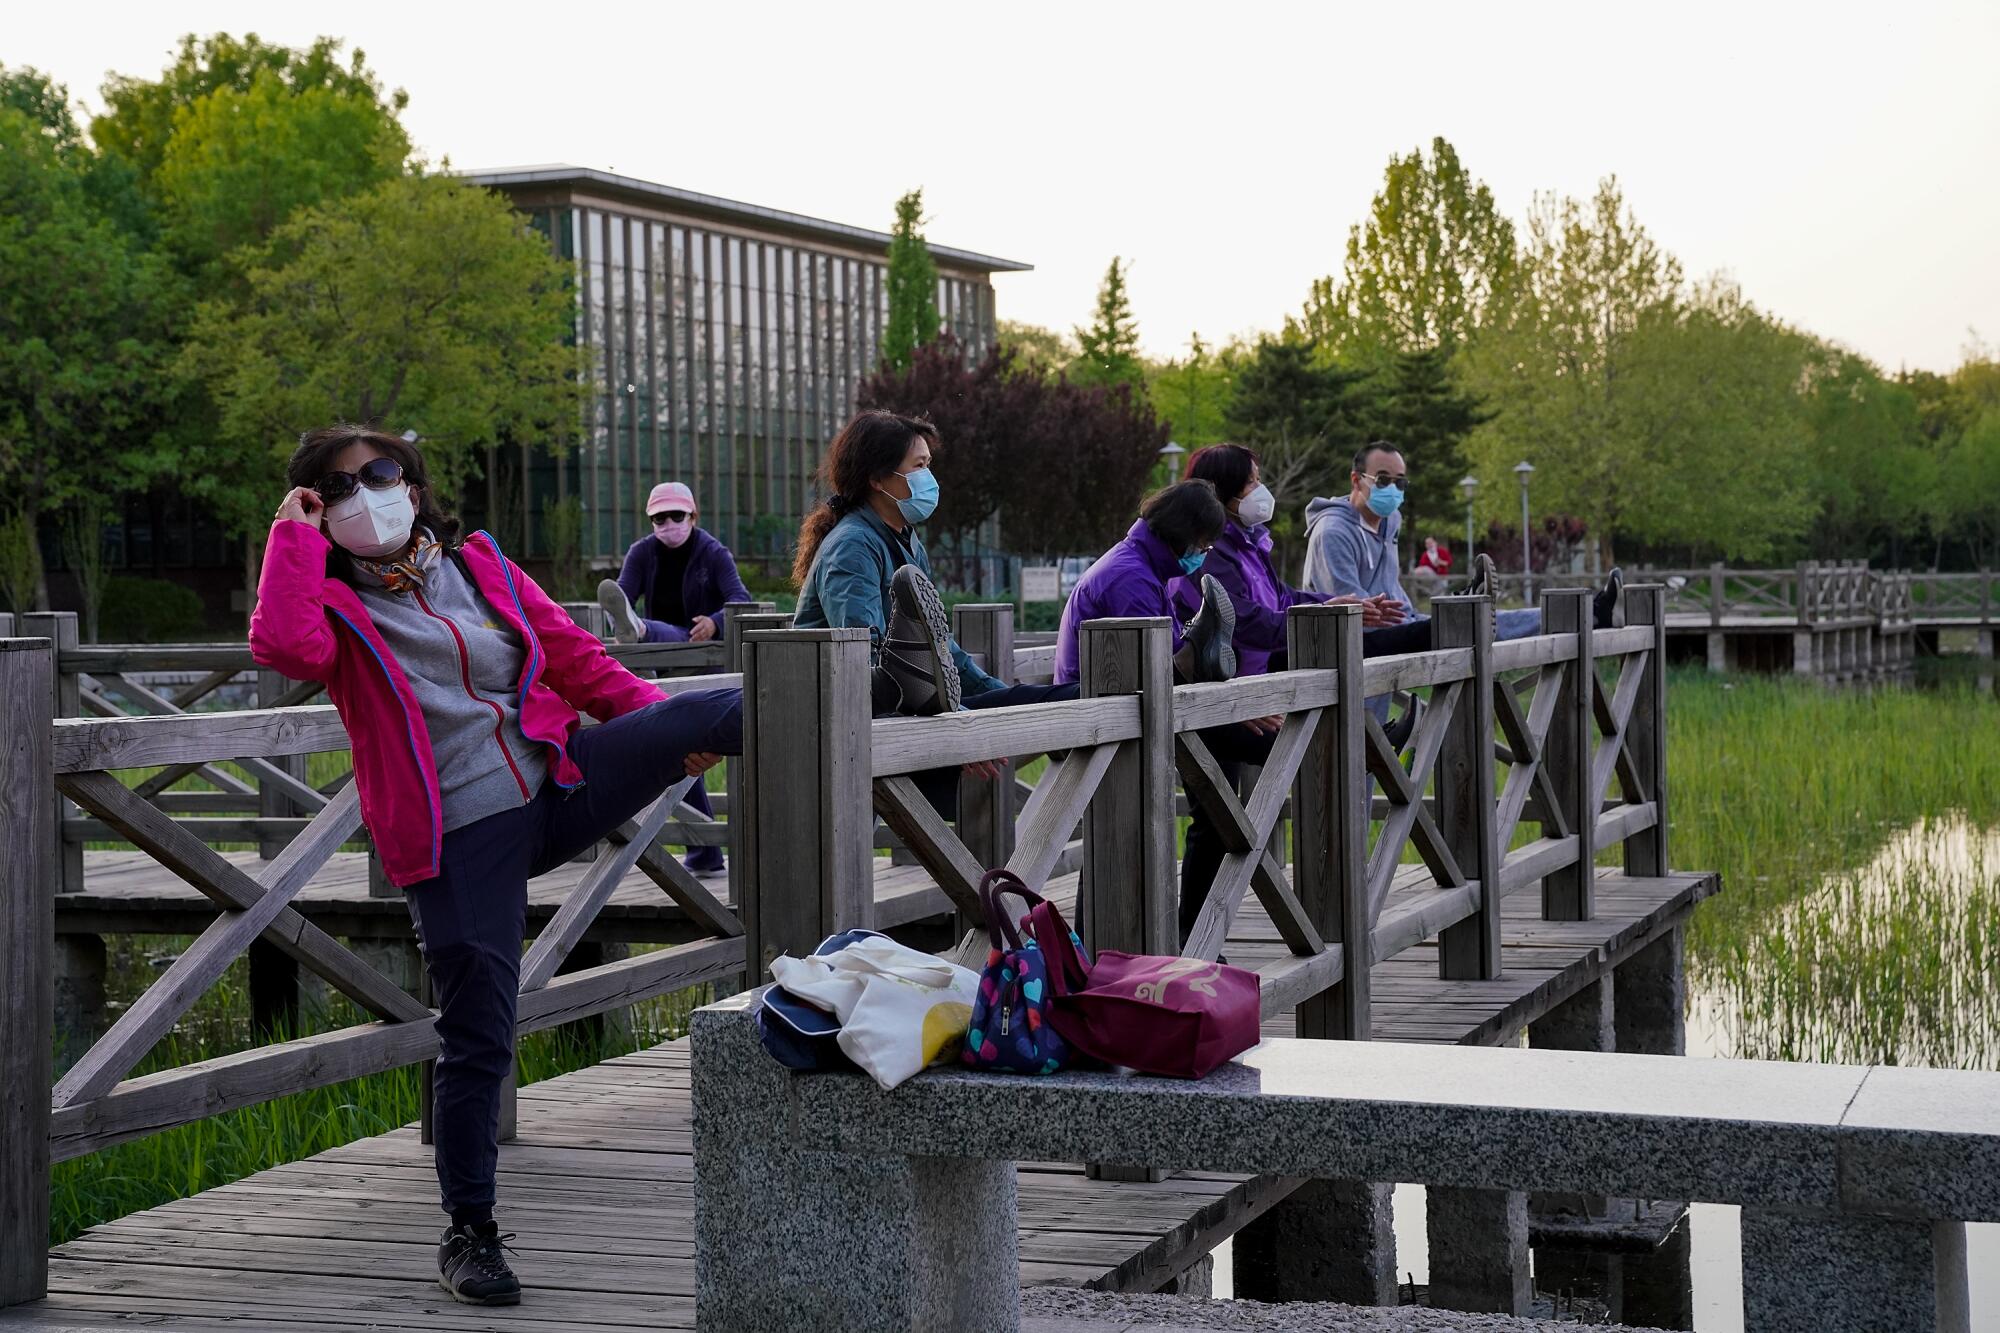 Citizens wear protective masks while exercising at a park in Beijing on April 23. Life is slowly returning to normal in the capital more than three months after a lockdown was imposed to contain the coronavirus outbreak.